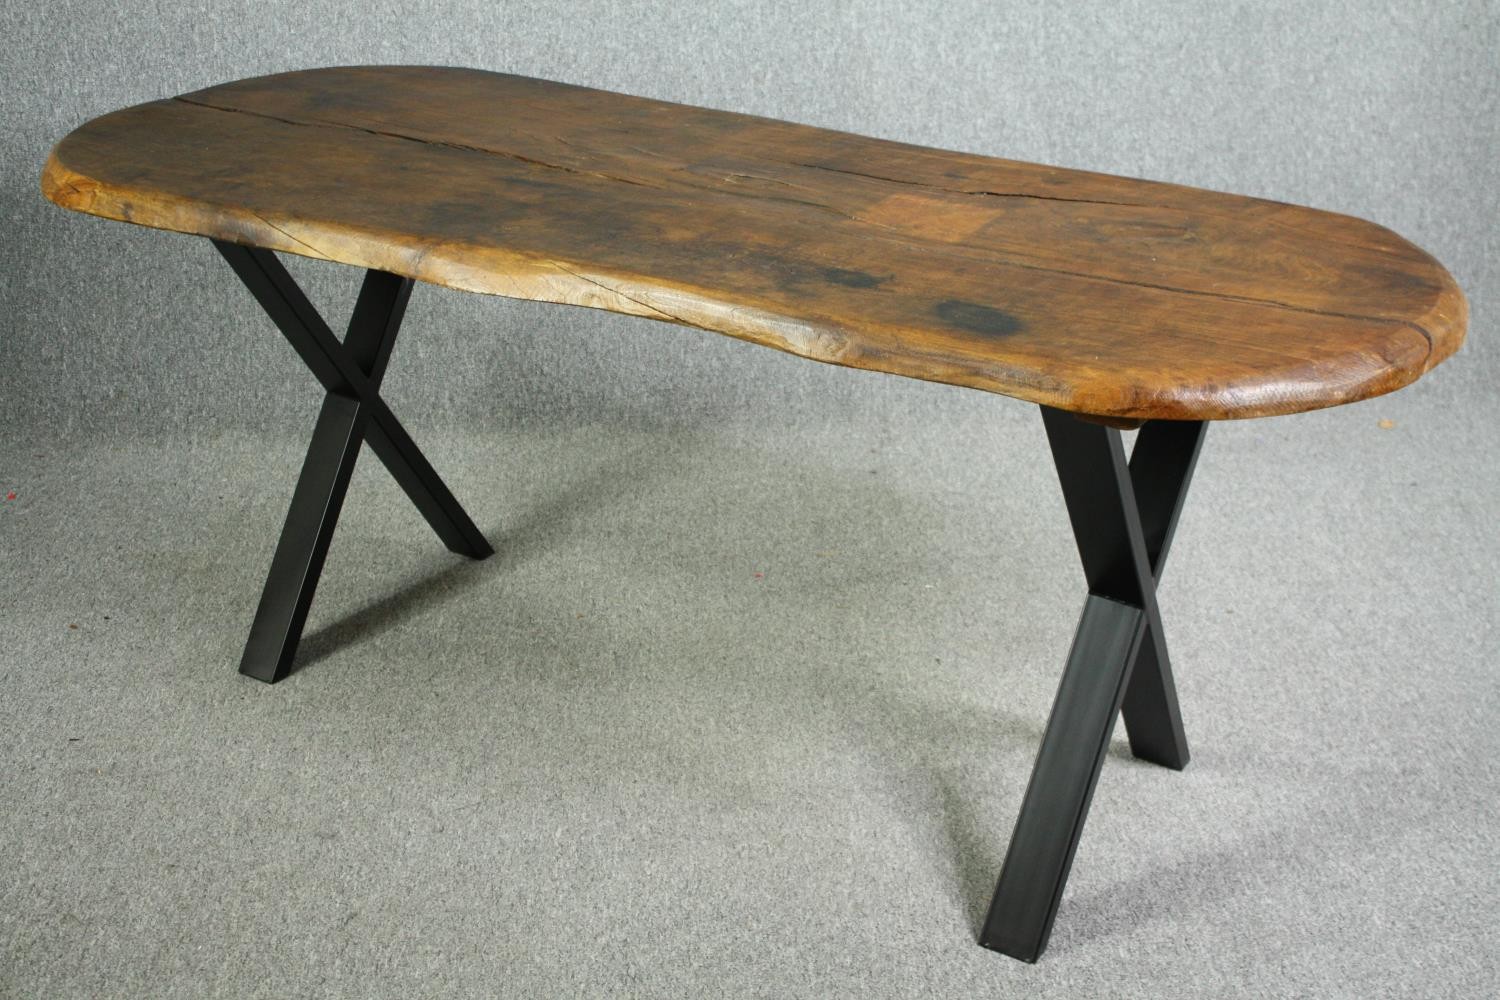 Dining table, rough hewn hardwood top on metal X trestle base. H.76 W.184 D.78cm. - Image 4 of 8